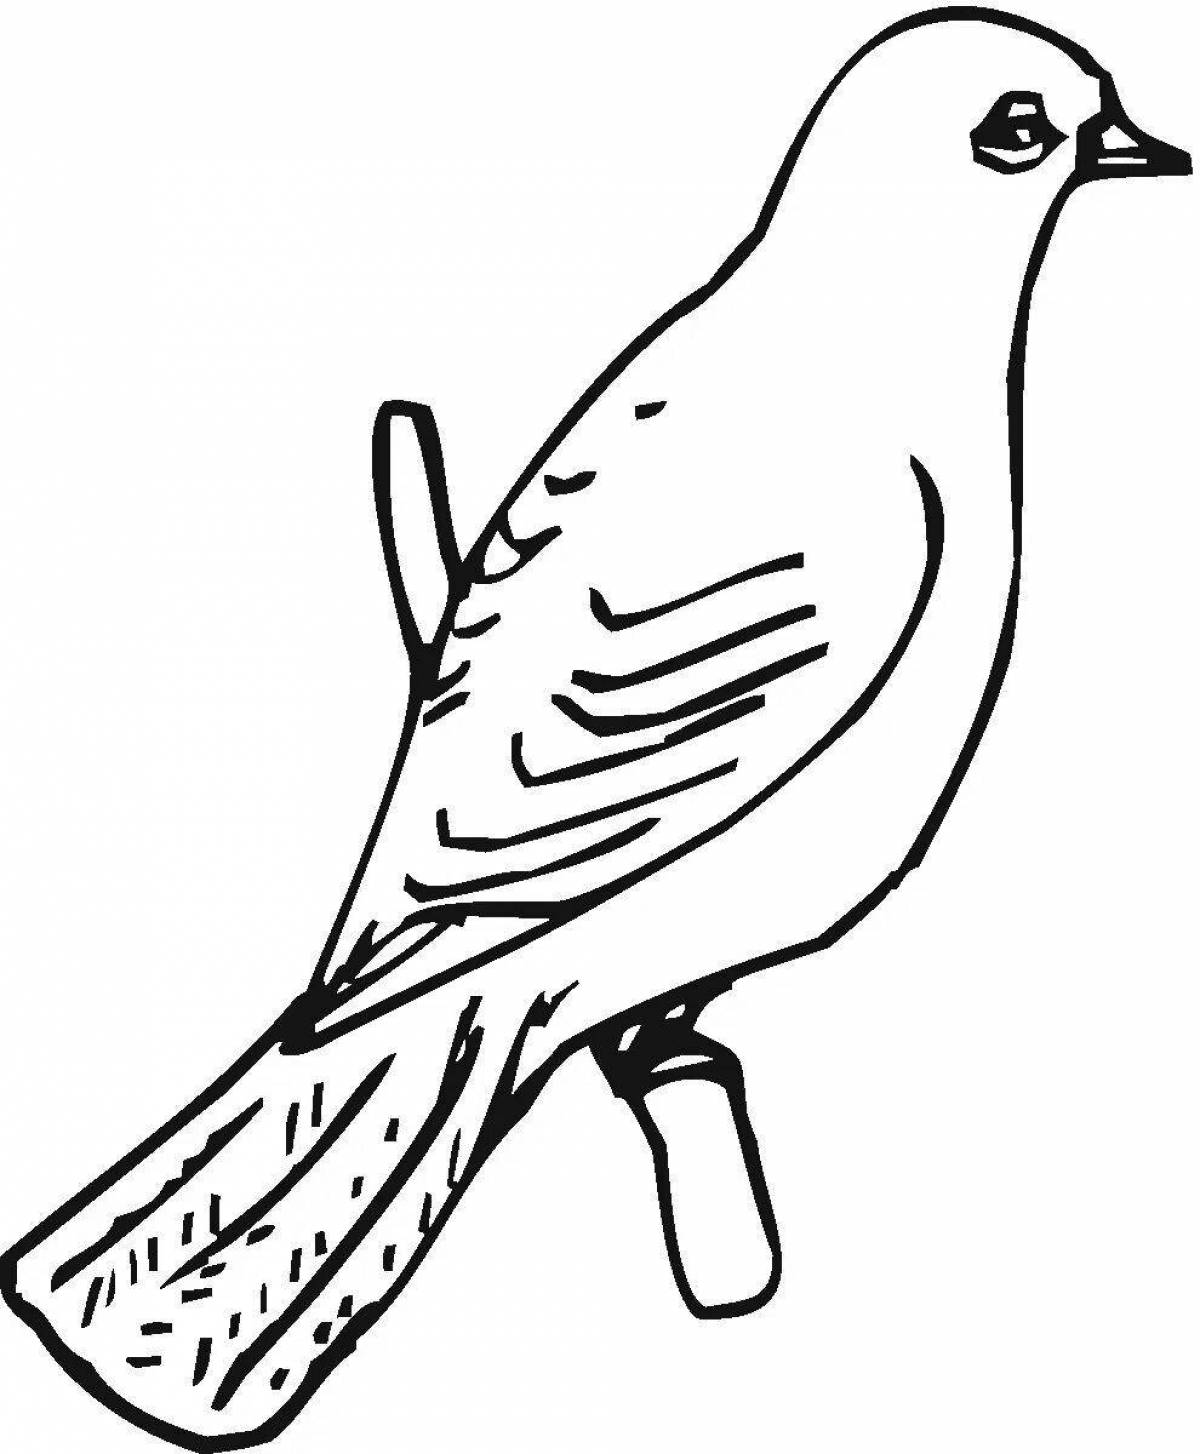 Amazing siskin coloring book for kids